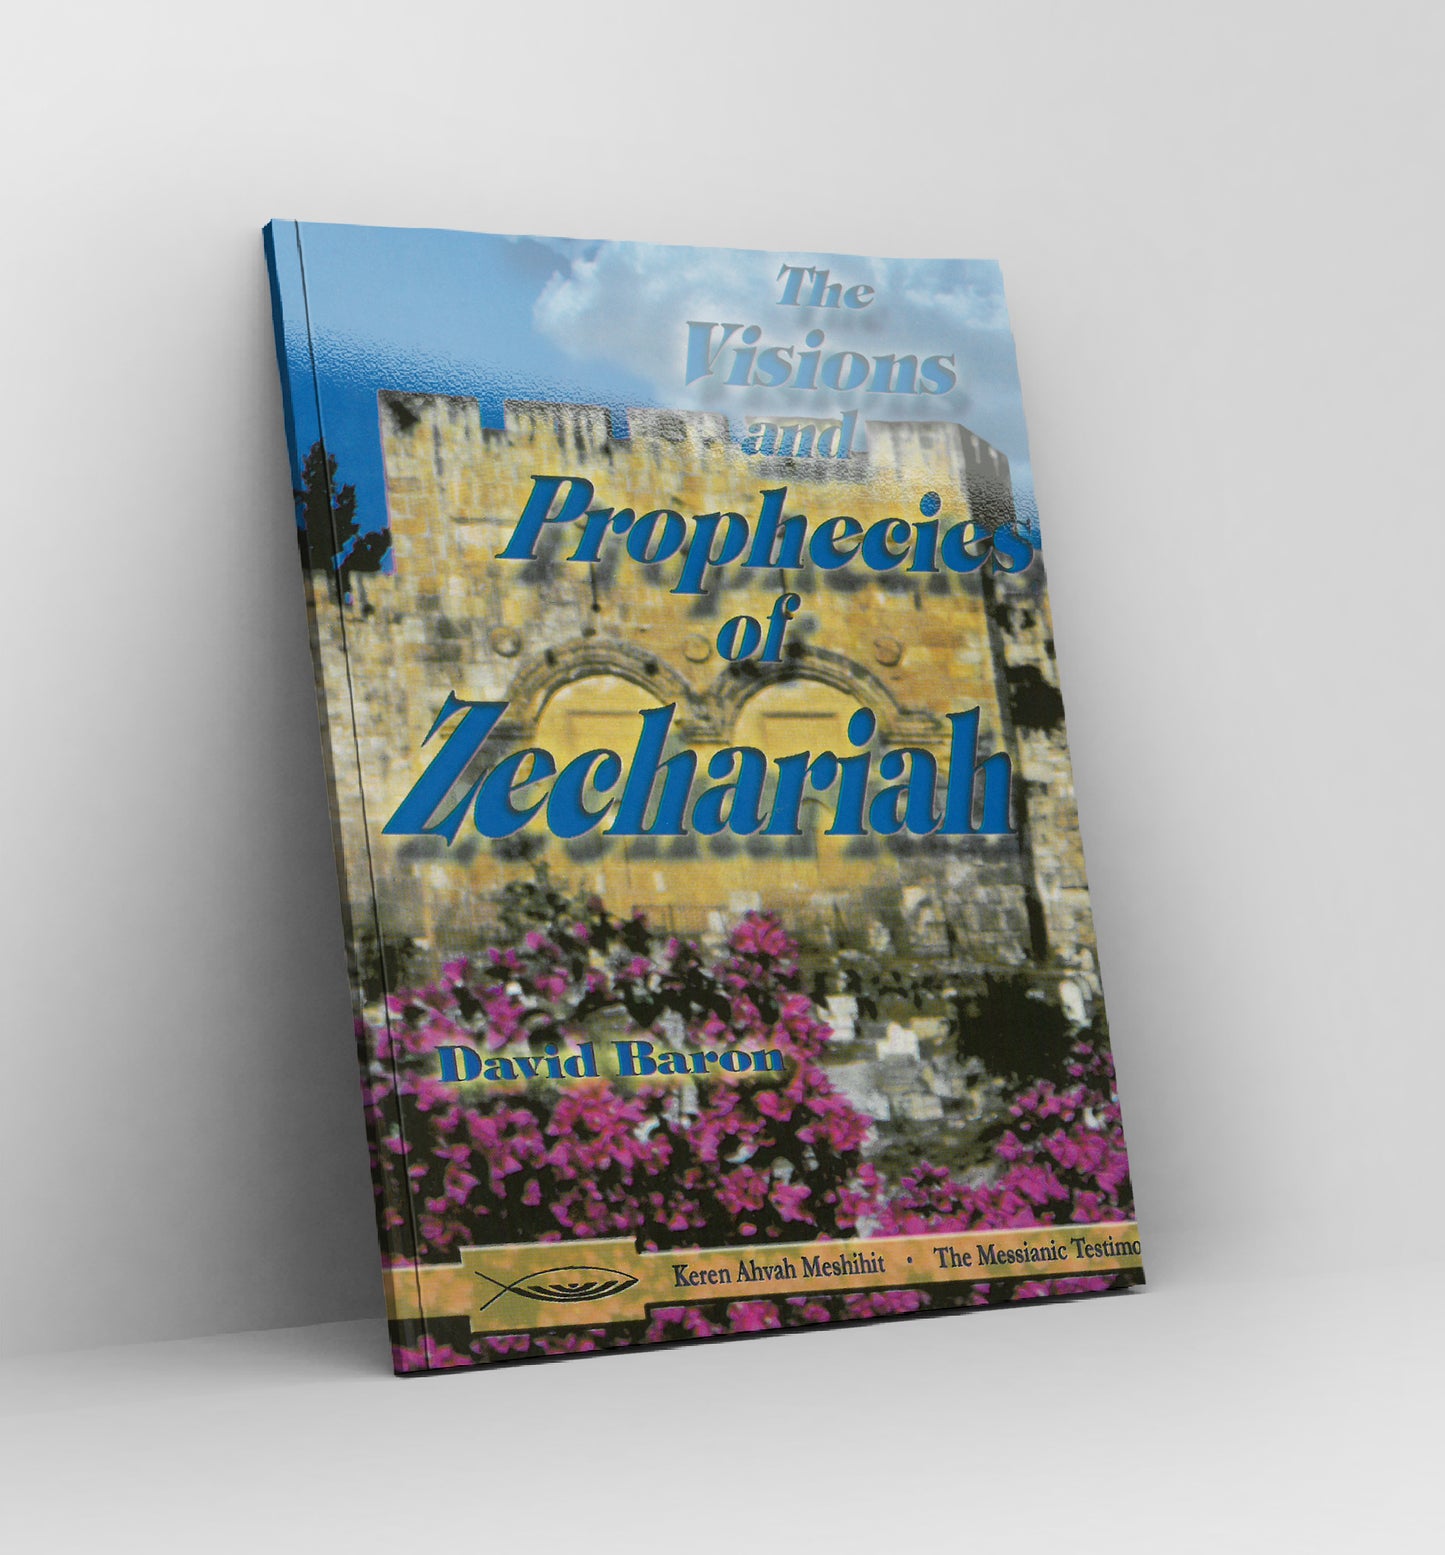 The Visions and Prophecies of Zechariah by David Baron - Book